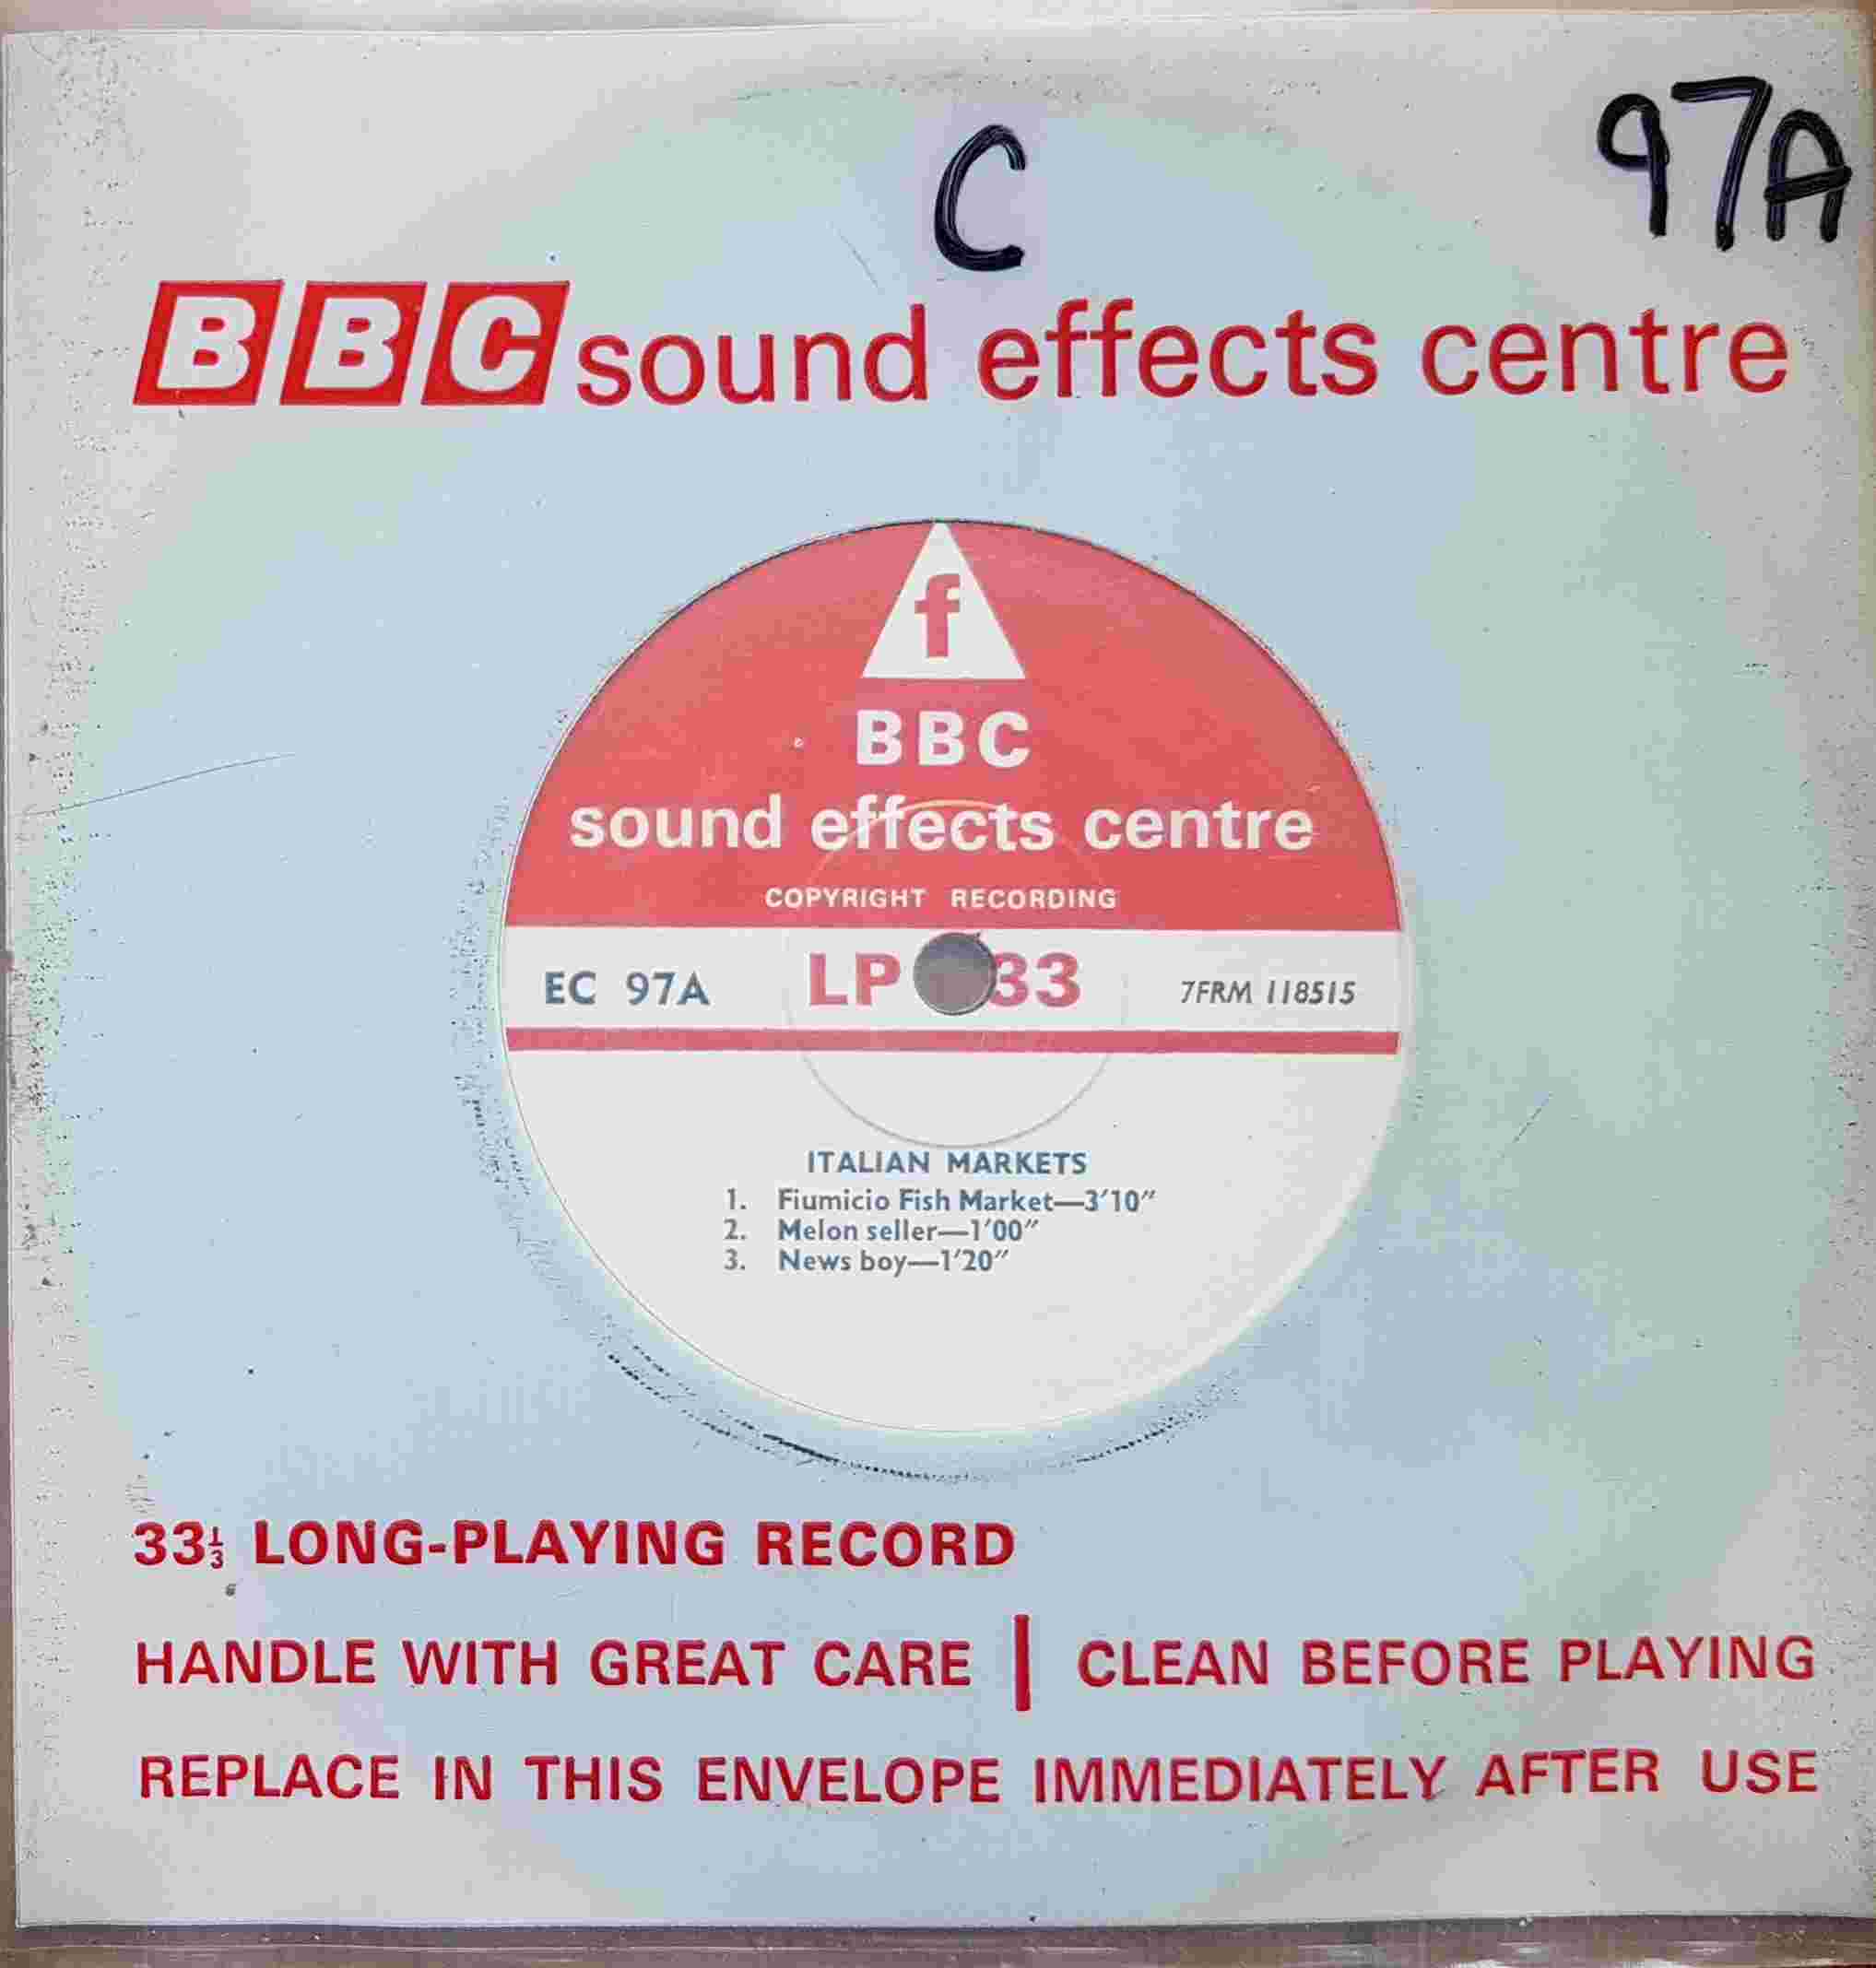 Picture of EC 97A Italian markets by artist Not registered from the BBC singles - Records and Tapes library